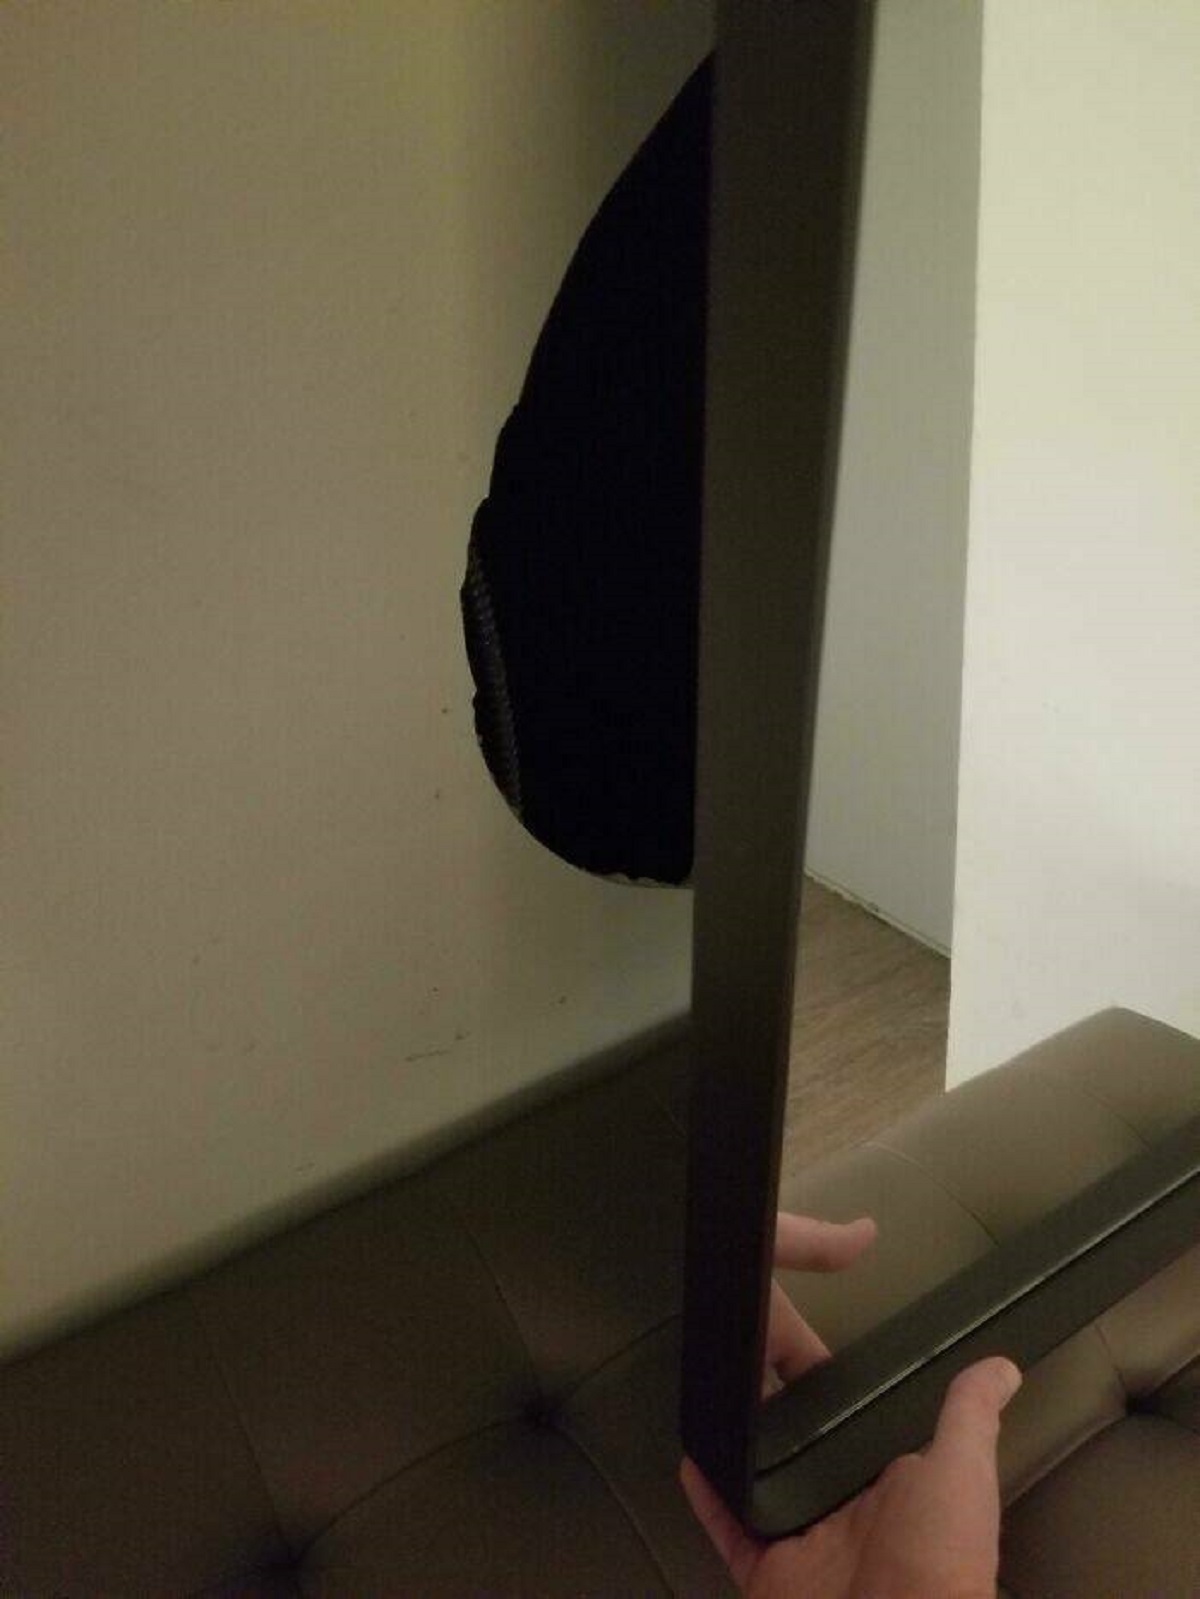 "Saw The Full Mirror In My Hotel Room Randomly Shake And Discovered This Space In The Wall Behind It"